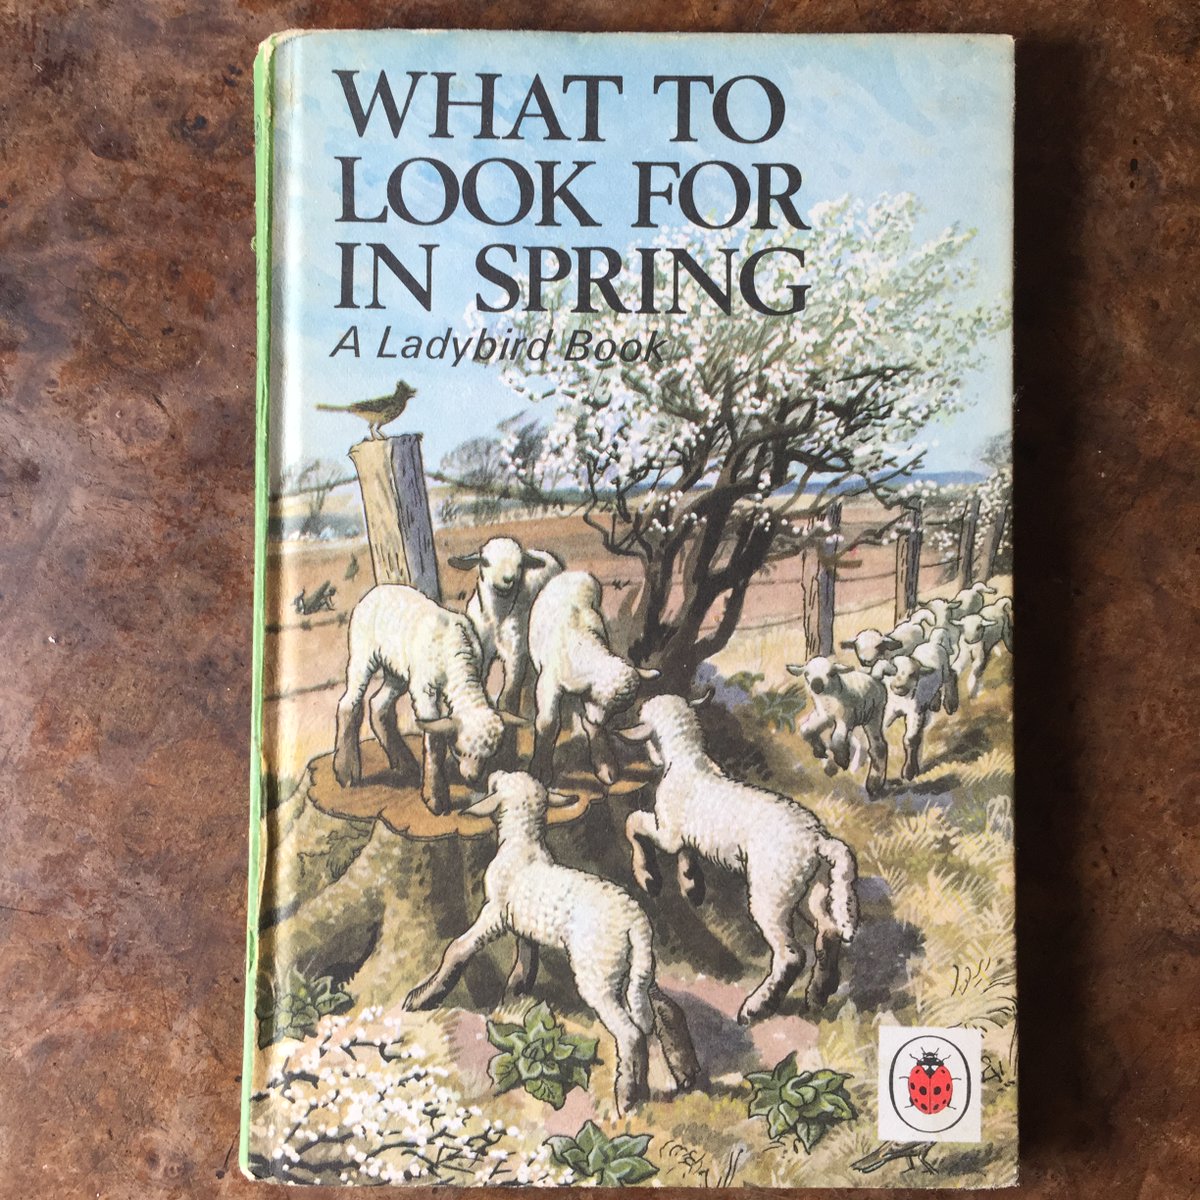 I love these Ladybird Books, the illustrations by Charles Tunnicliffe are charming. But if his illustrations were true to life, flicking through their pages in 2020 is a stark reminder of what we have lost from our landscape in just 60 years. (THREAD)